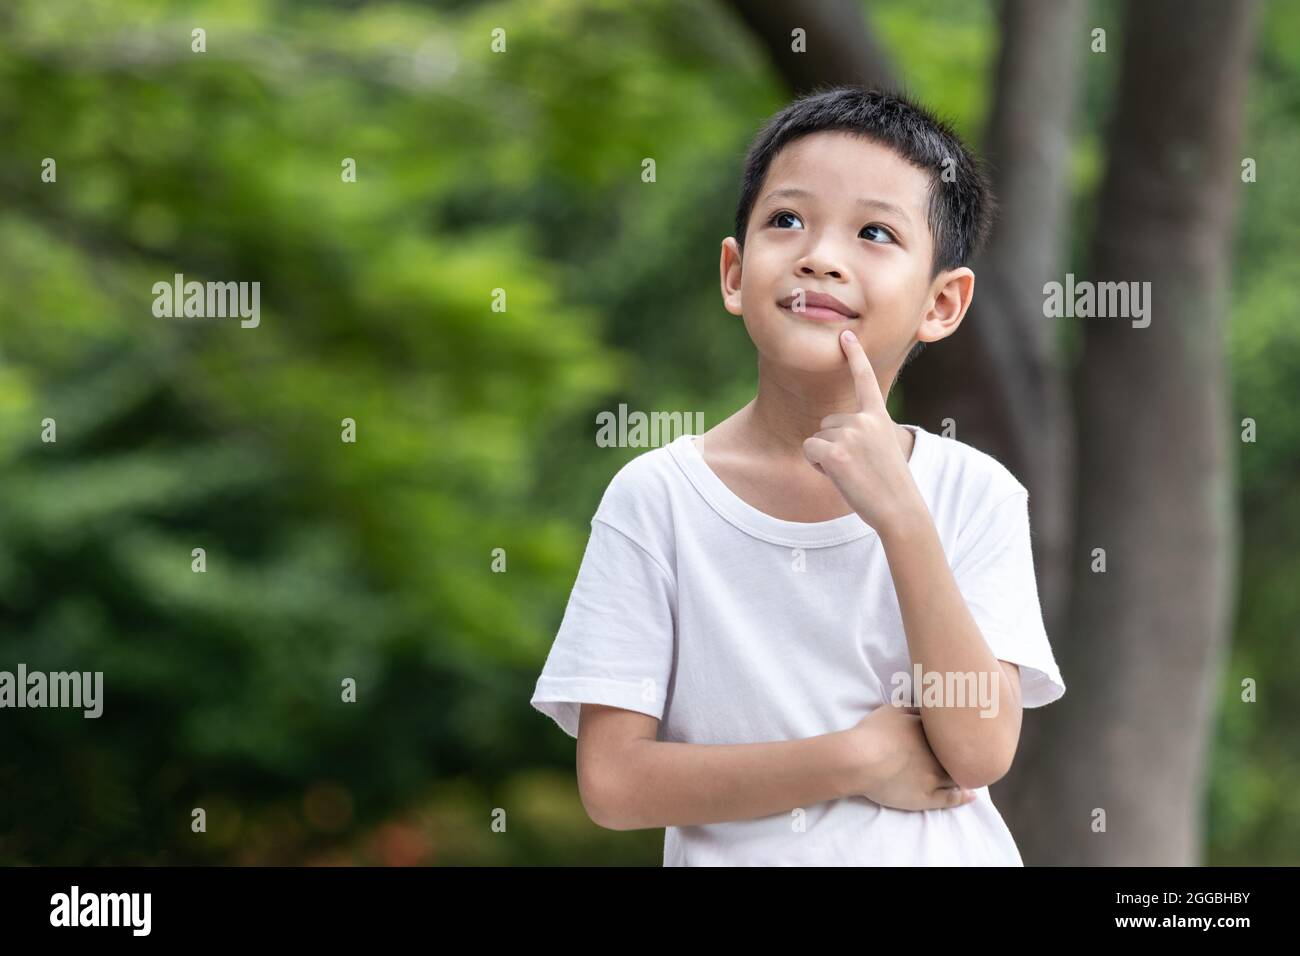 A child wearing a white t-shirt looks smart-looking up in doubt. Little Asian boy thinking with hand on chin. Stock Photo